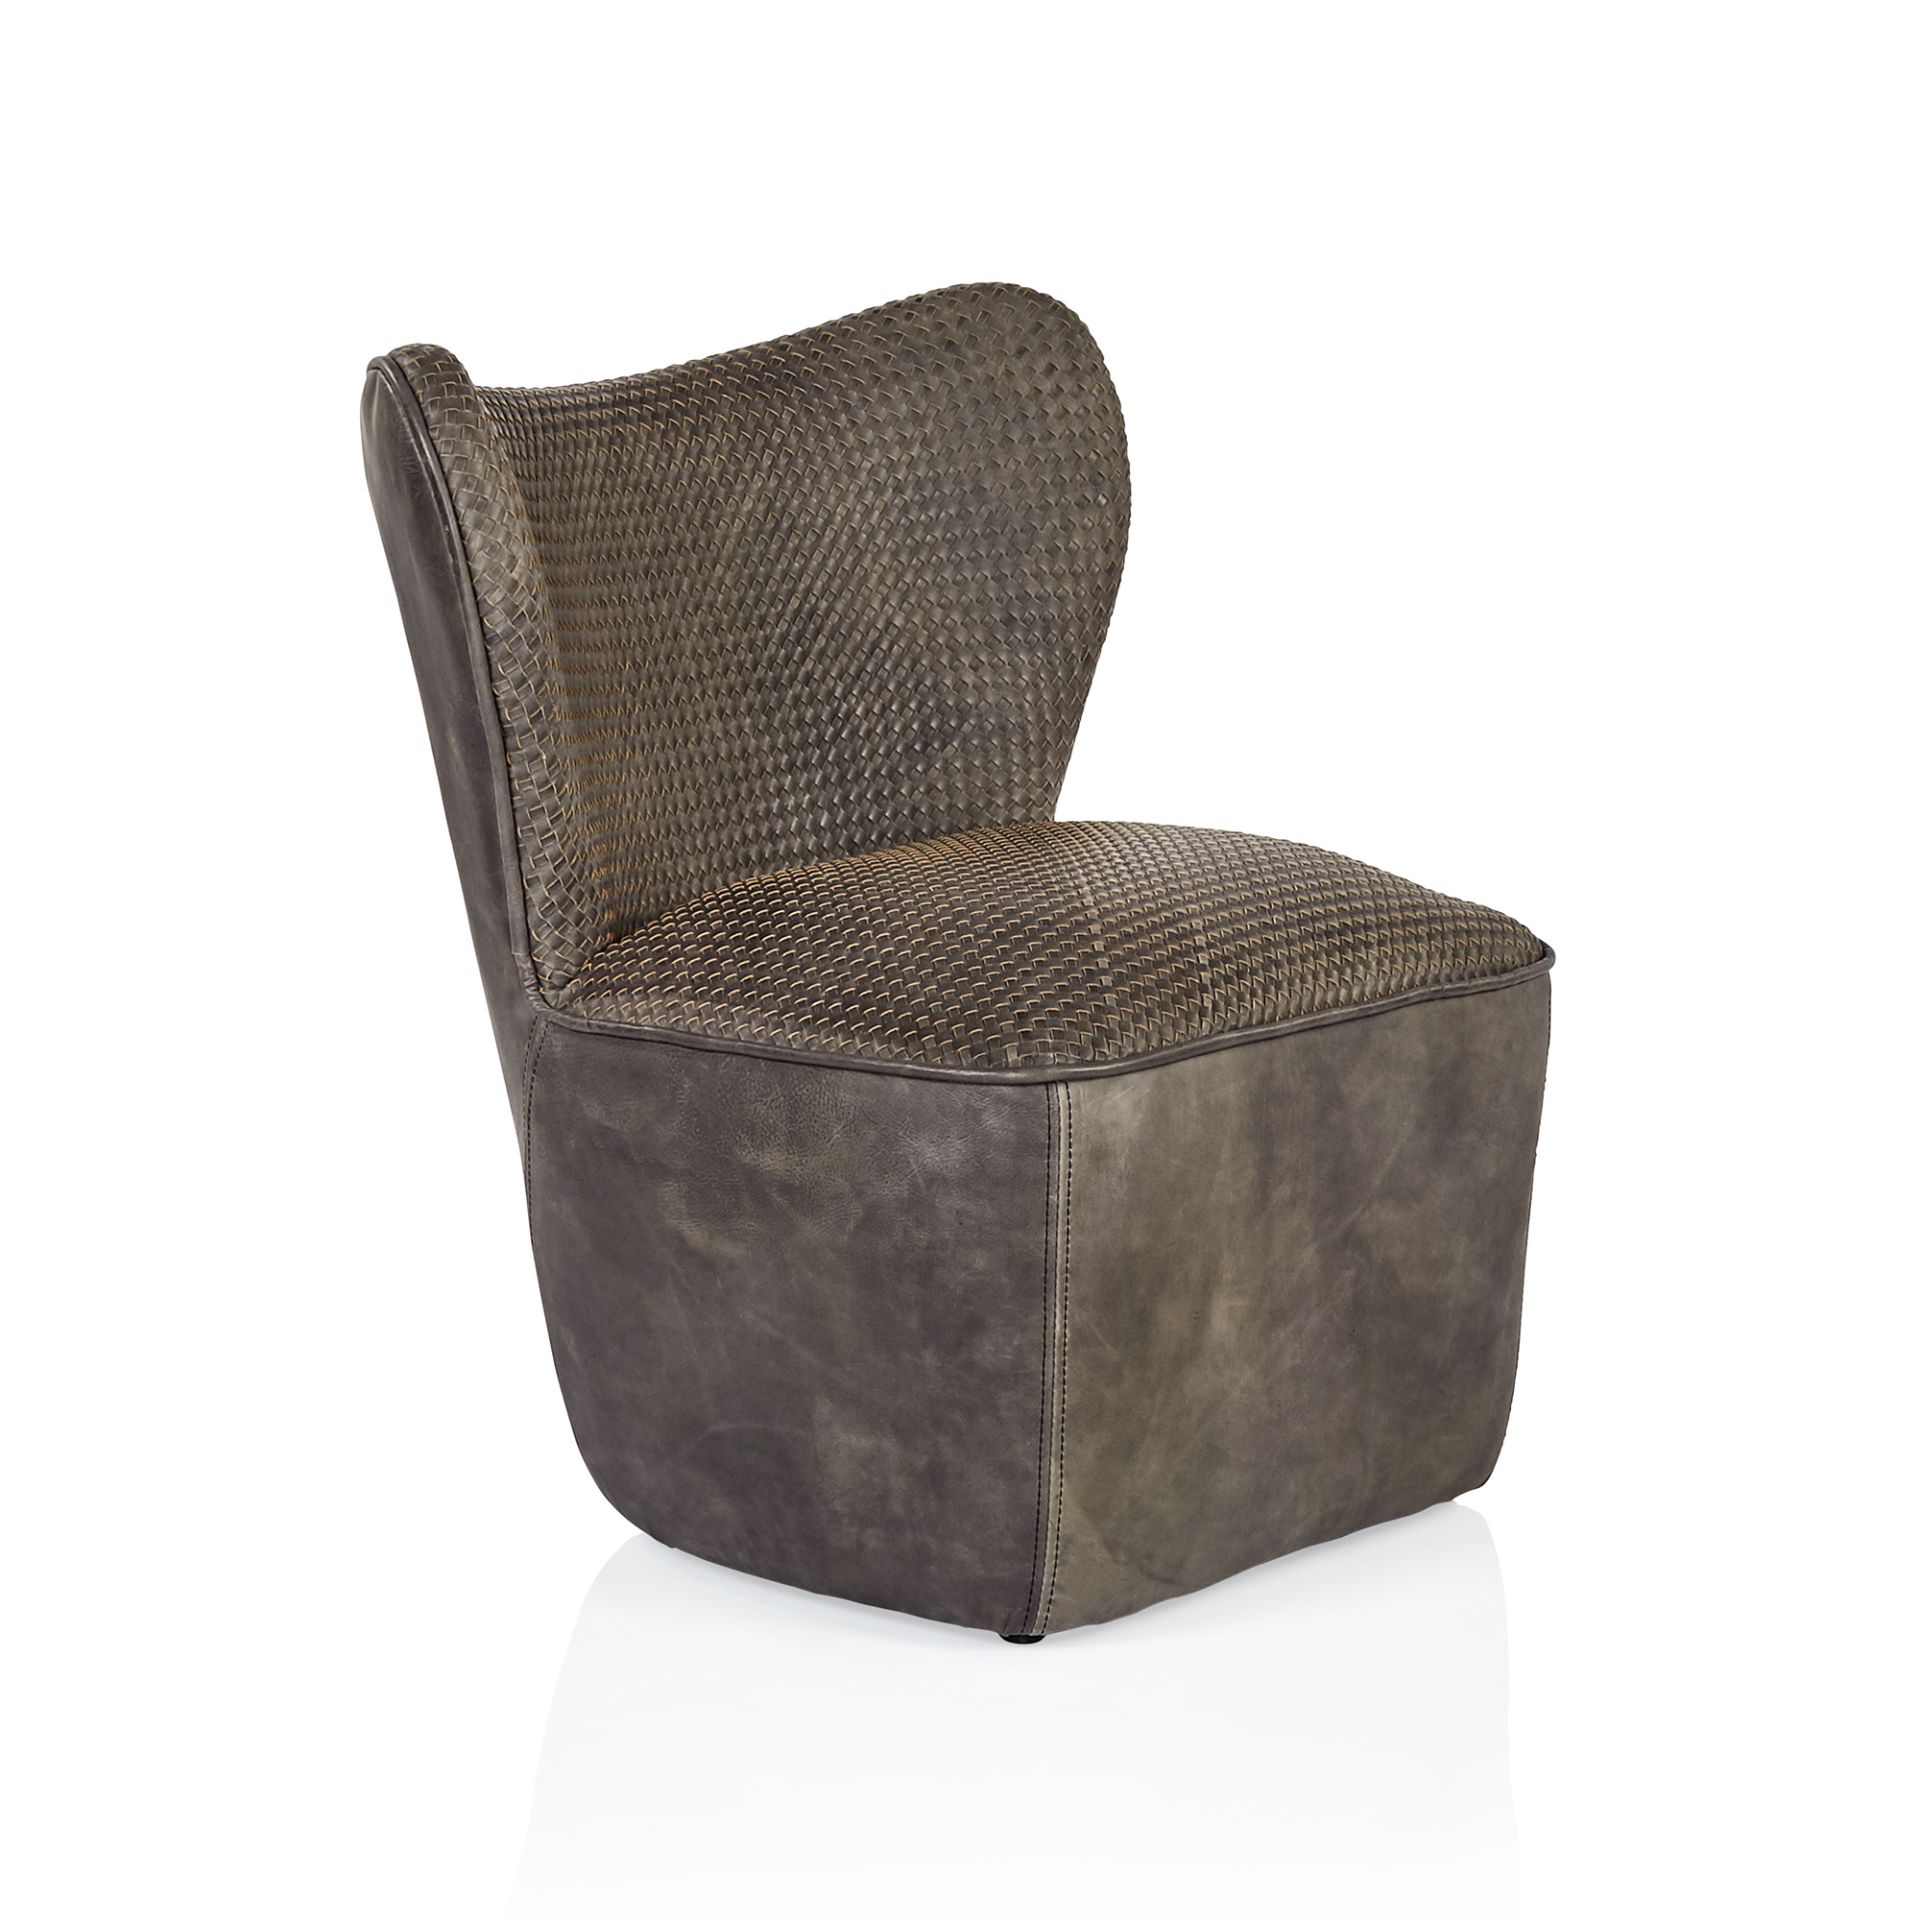 Weave Chair A distinctly modern take on the classic slipper chair. The sumptuous Weave chair invites